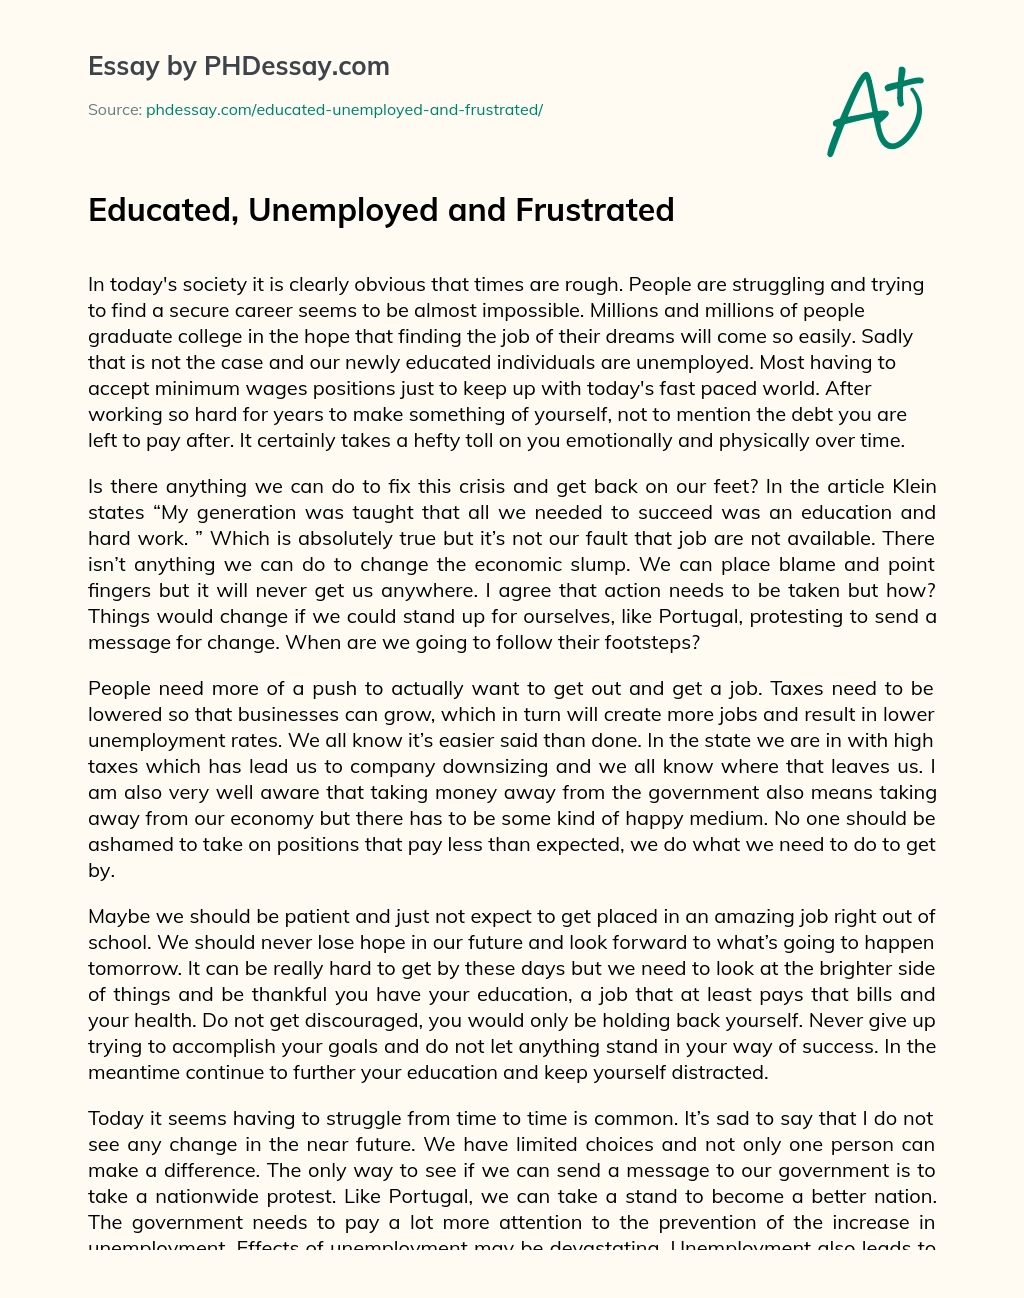 Educated, Unemployed and Frustrated essay